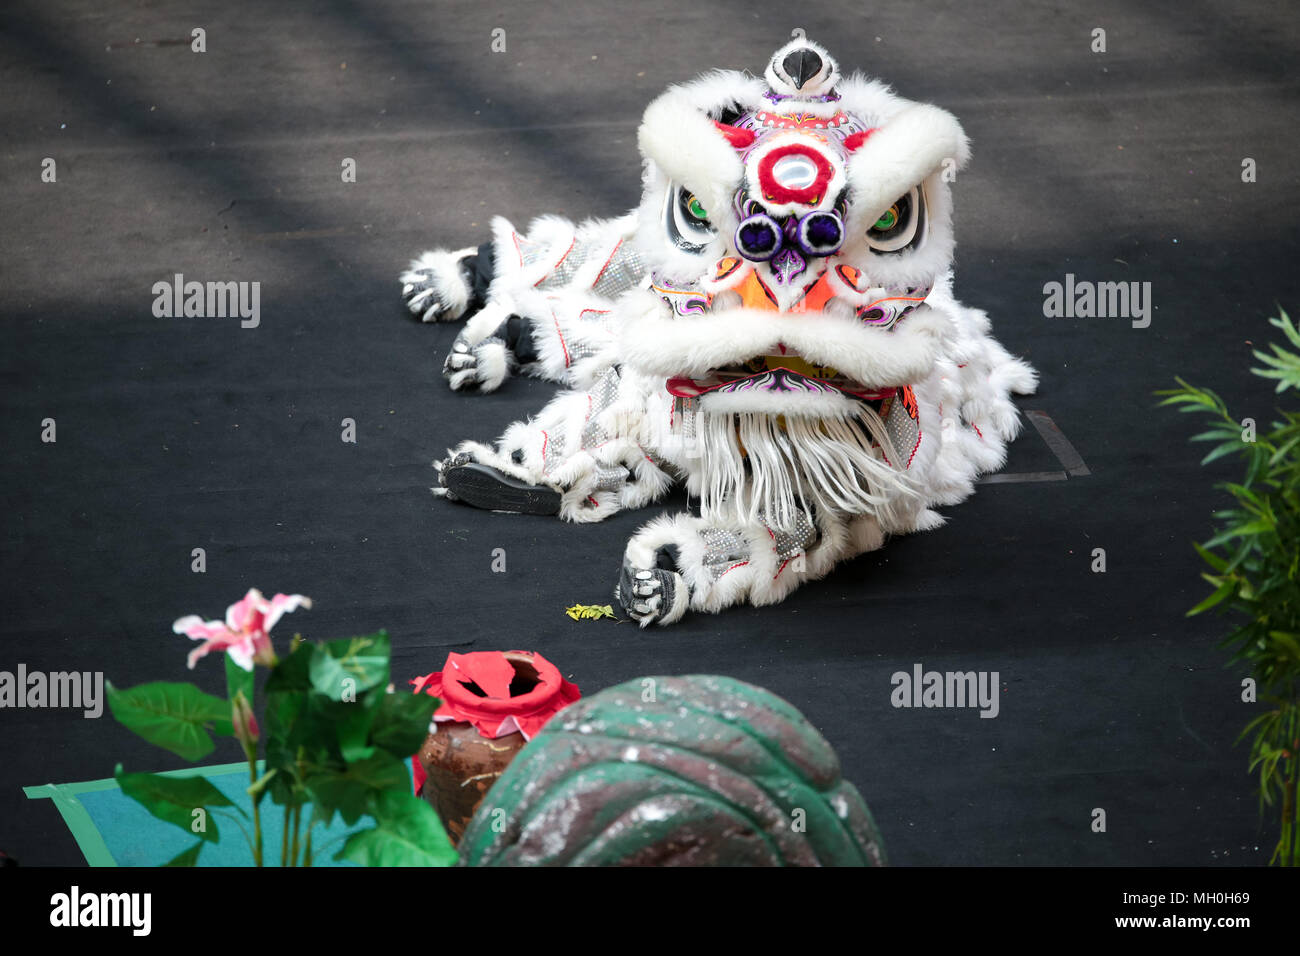 White color lion dance performing its stunts at VIVA HOME shopping mall in Kuala Lumpur, Malaysia. Stock Photo